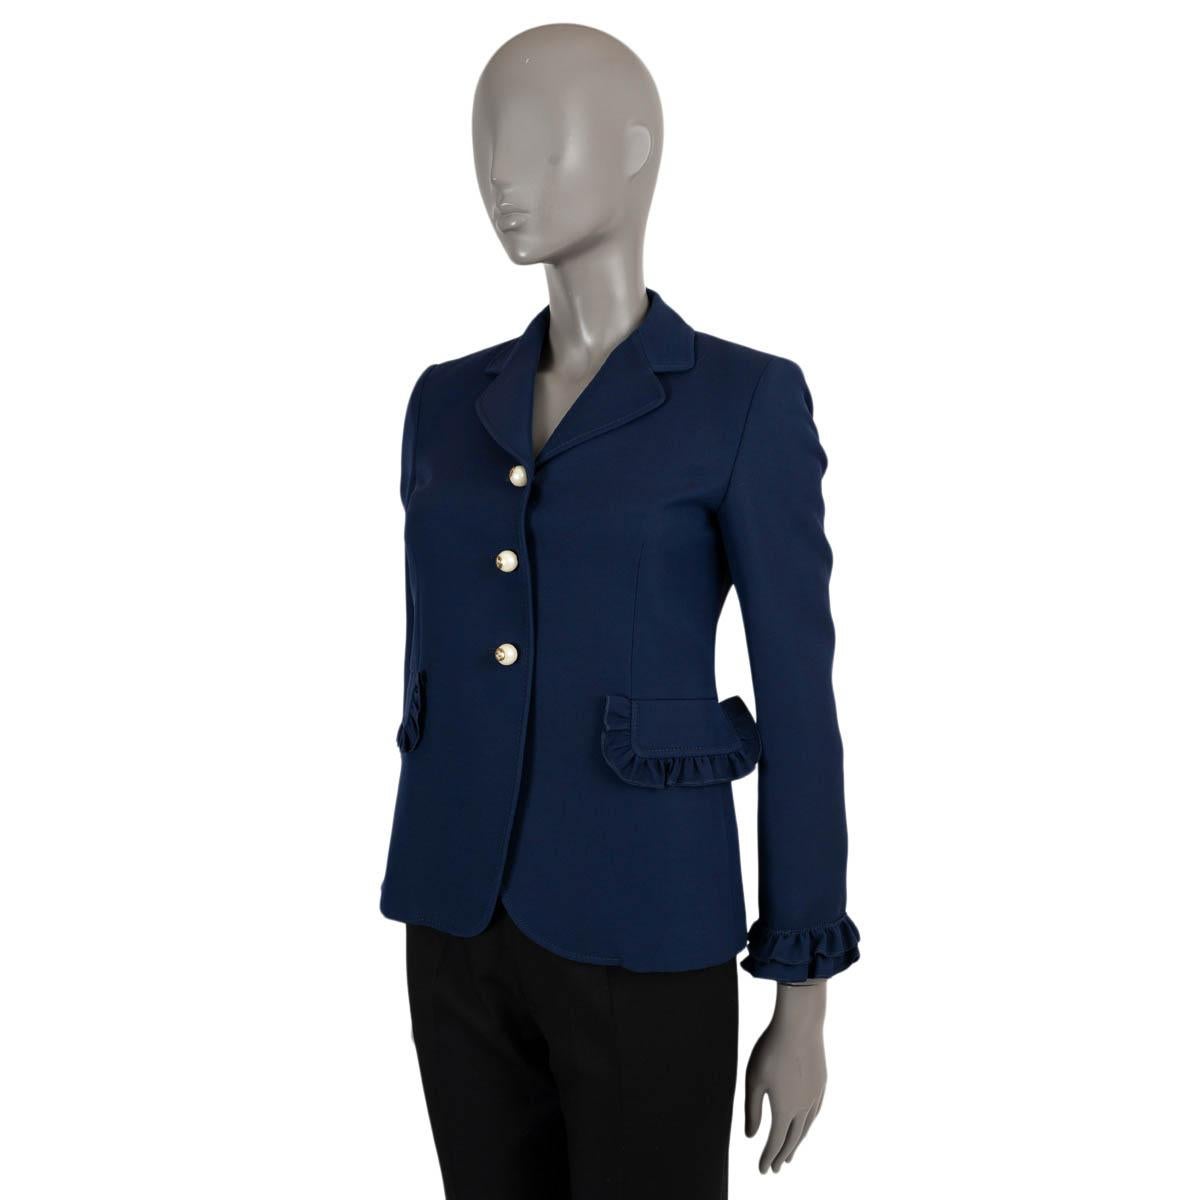 100% authentic Gucci blazer in navy blue wool crepe (51%) and silk (49%) with ruffled trims. Two flap pockets, faux pearl buttons with GG in antique gold-tone. Lined in pink acetate (71%) and silk (29%). Has been worn and is in excellent